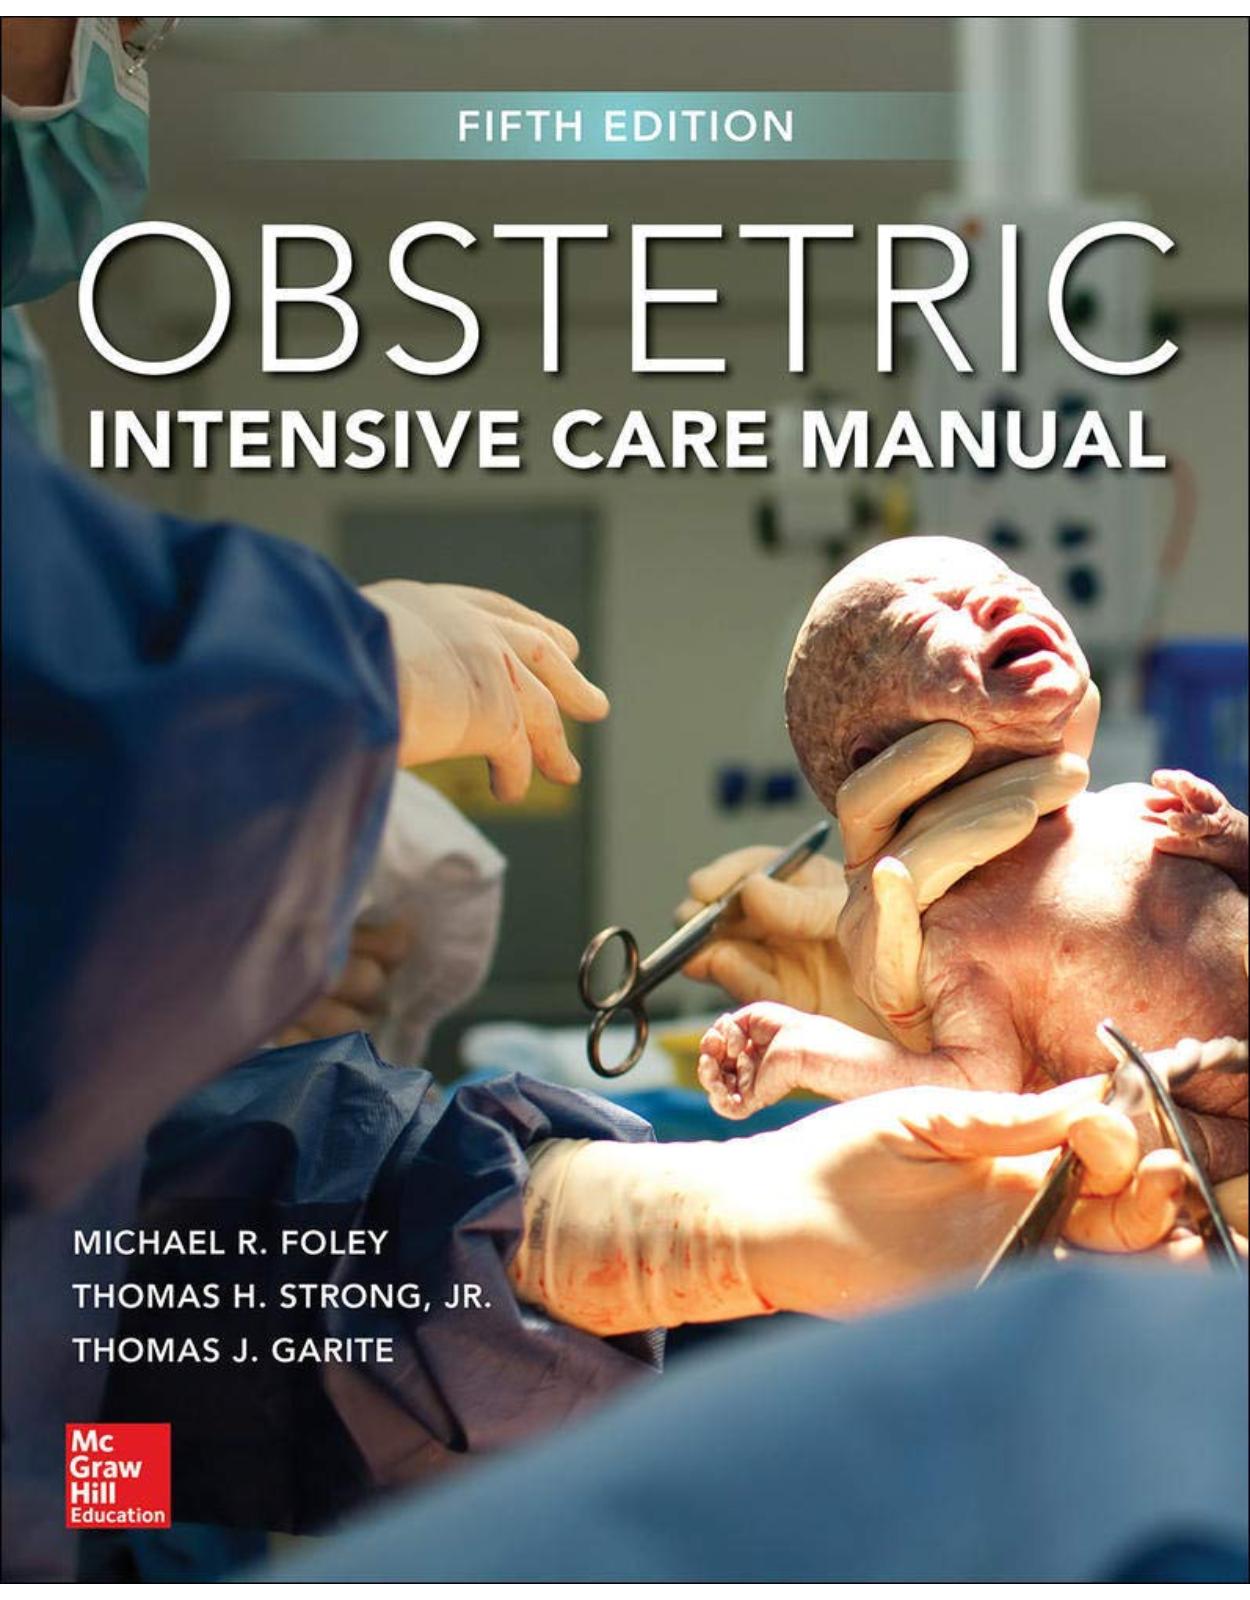 Obstetric Intensive Care Manual, Fifth Edition 